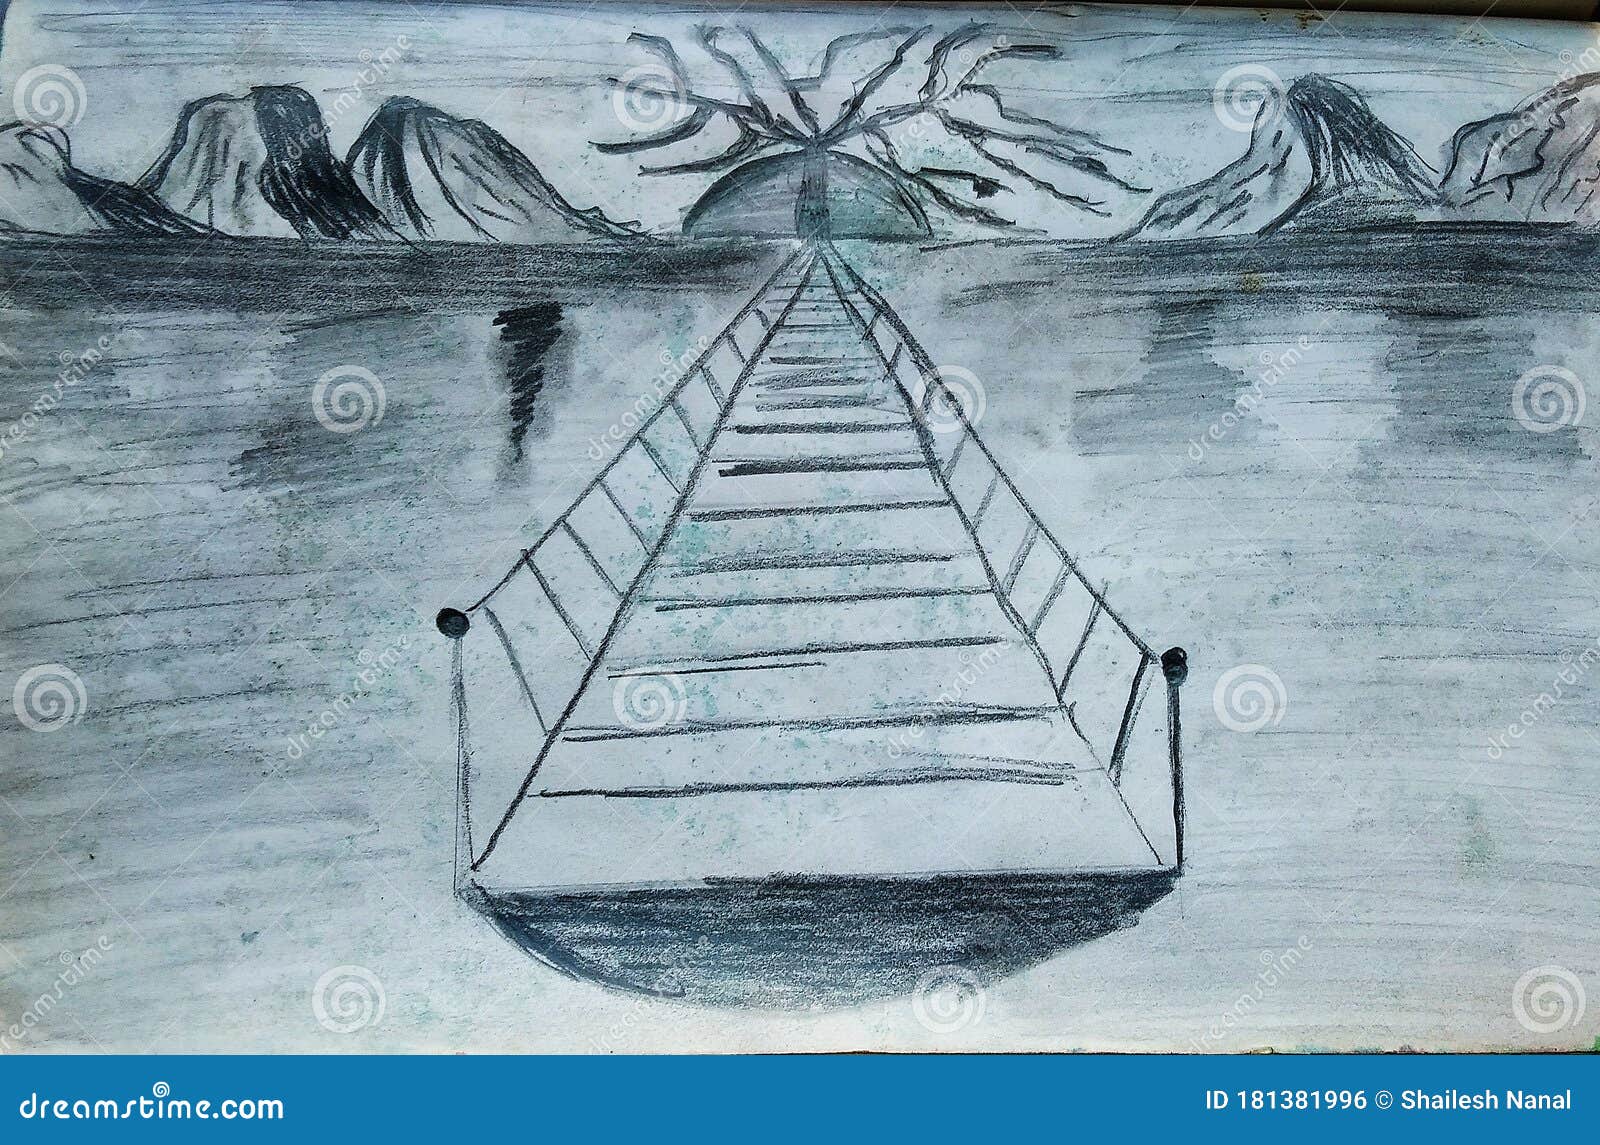 boat yacht chalk pencil landscape sketch doodle realistic simple poster  round art hand drawn 30028080 Stock Photo at Vecteezy